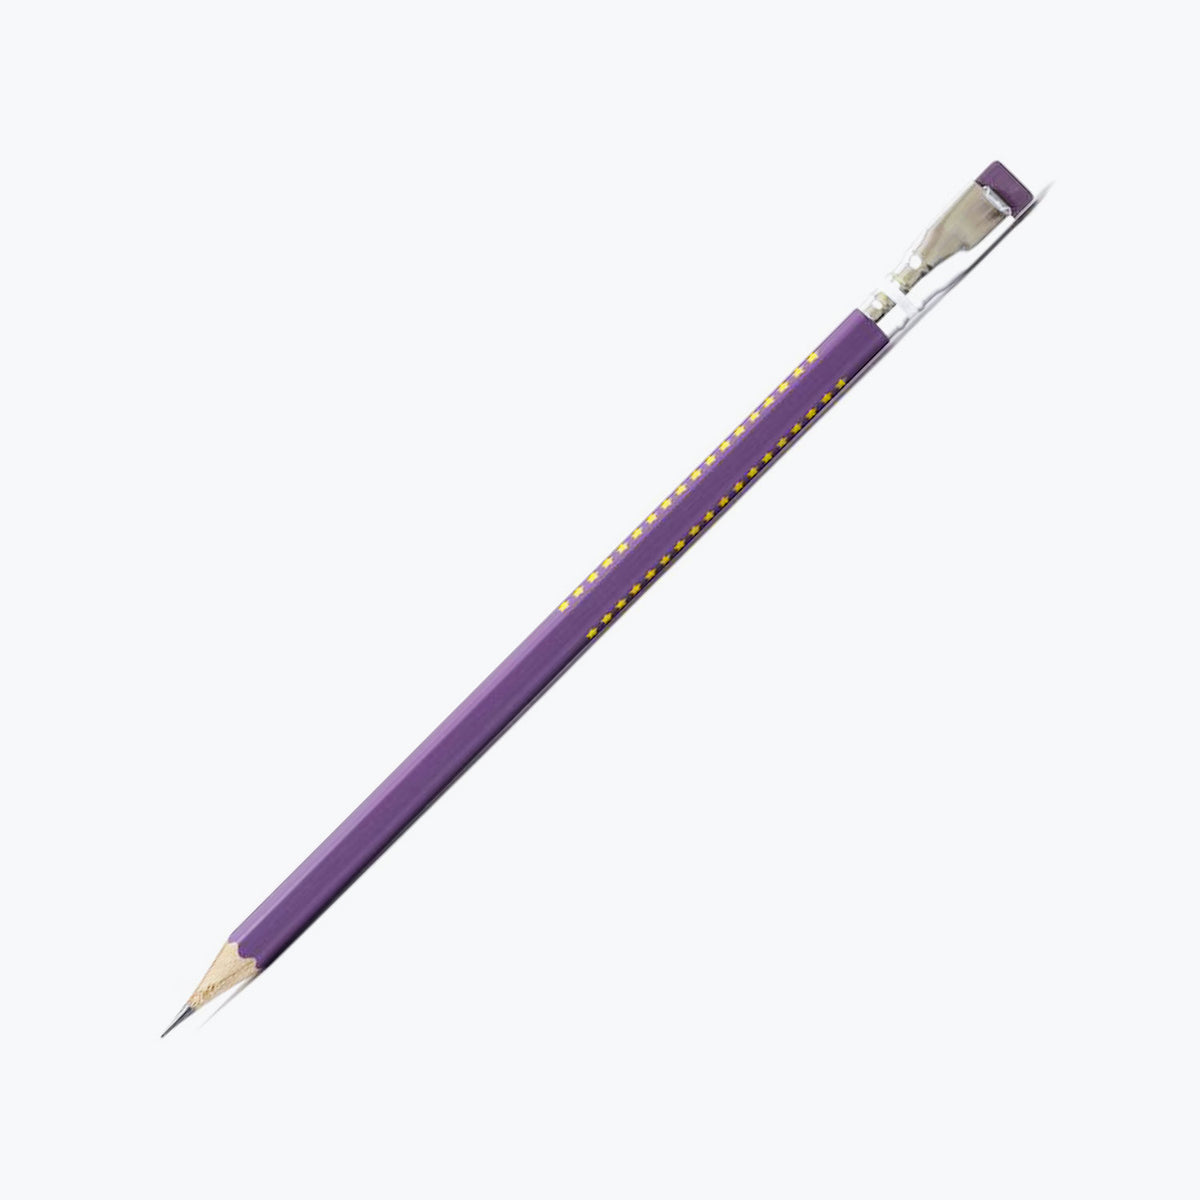 Palomino Blackwing - Pencil - Volume XIX - Pack of 2 (Limited Edition)